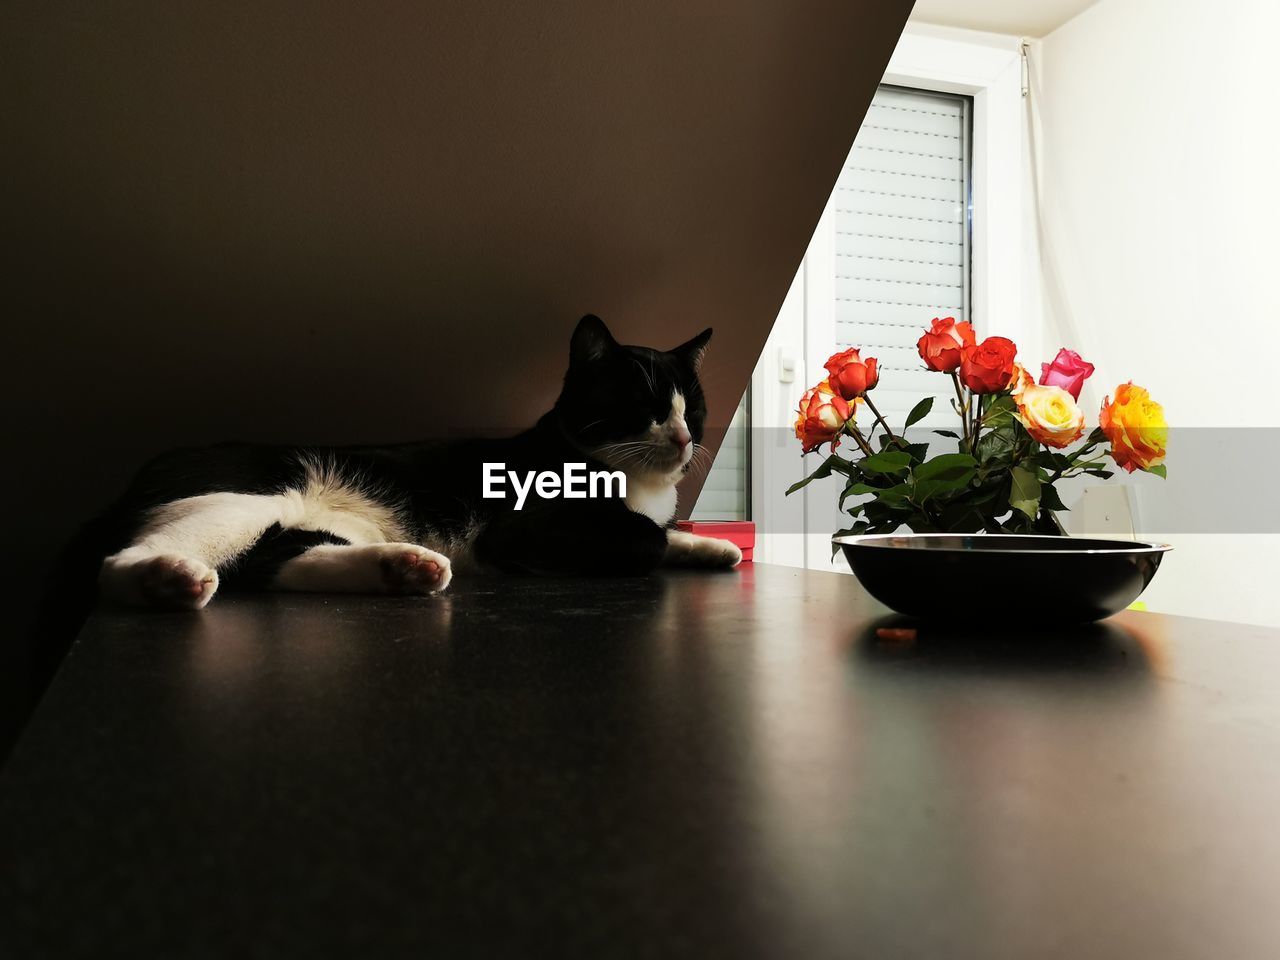 CAT LOOKING AT POTTED PLANT ON TABLE